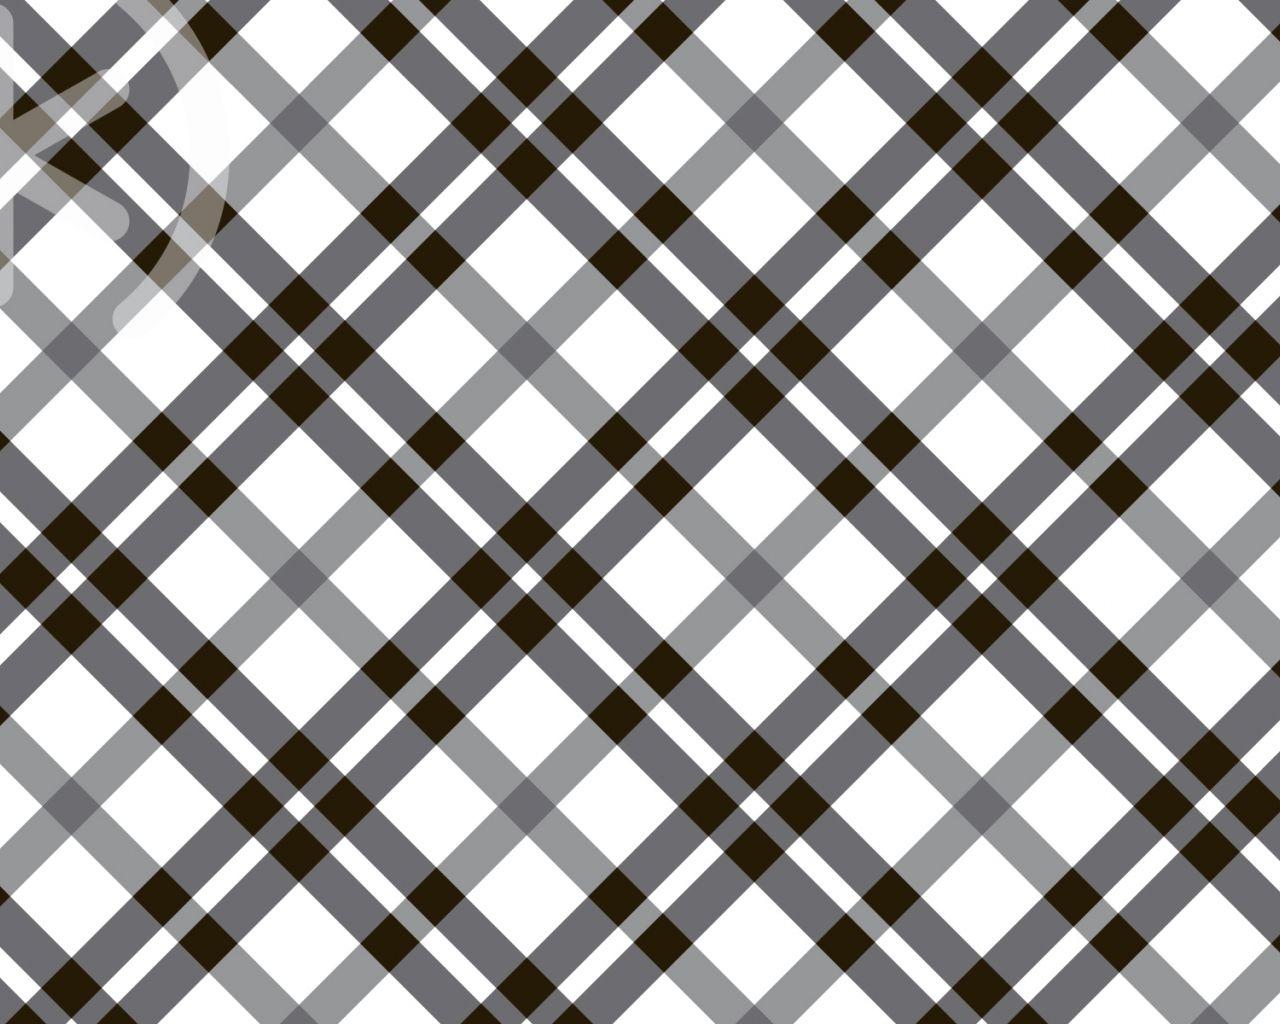 Checkered Abstract Wallpaper Black And White Fabric Illusion Pattern  Texture Background 3d Squares Illustration Stock Photo  Download Image Now   iStock